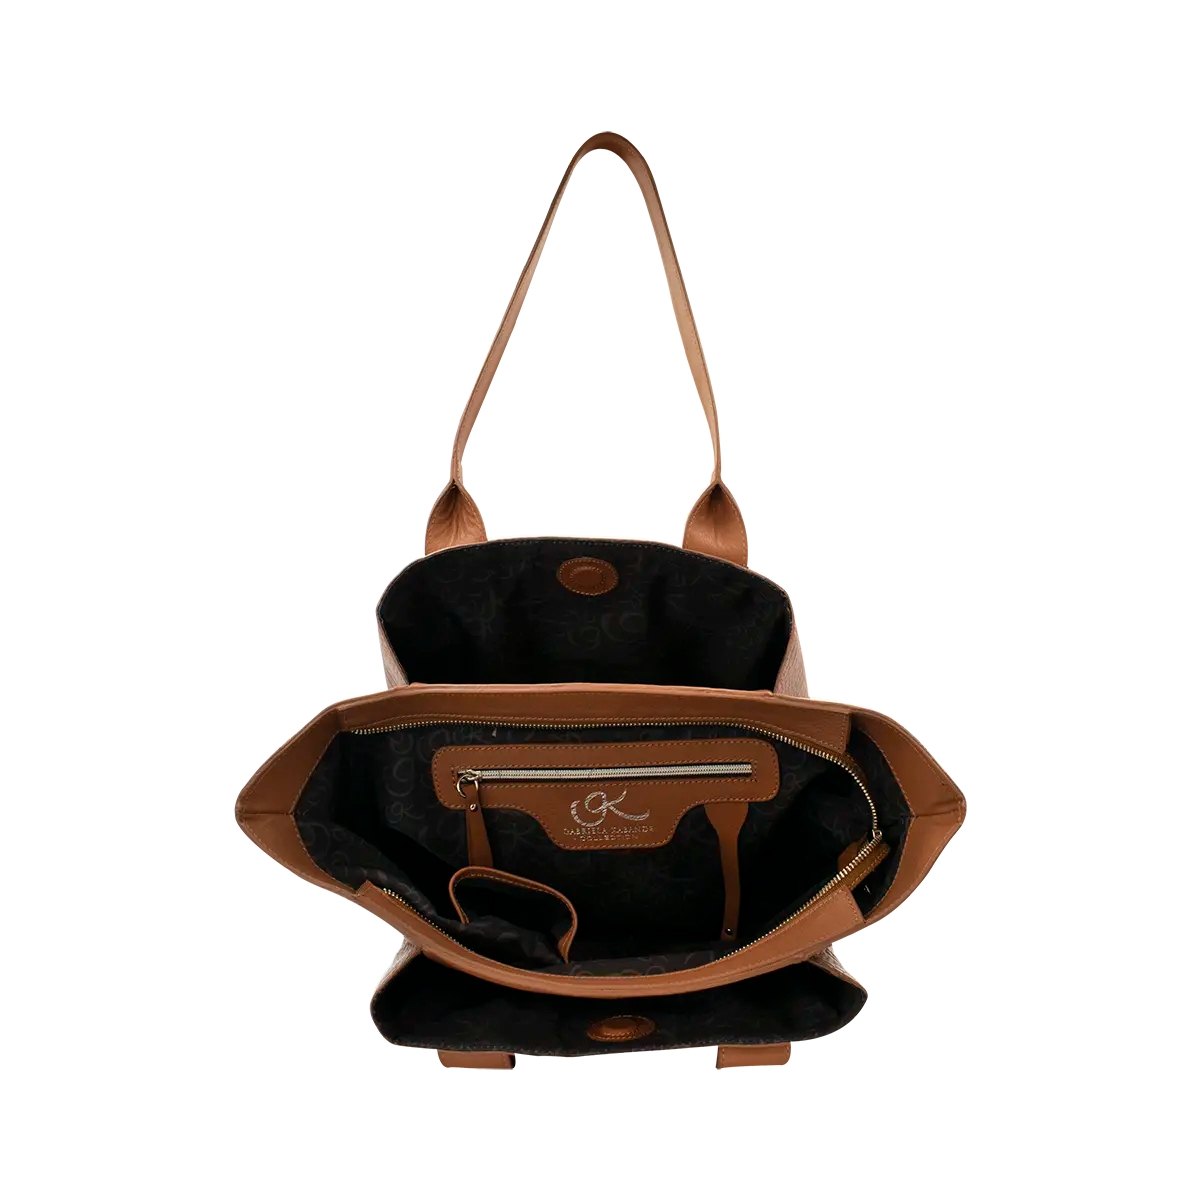 large caramel leather tote bag for women. Fashion Accessories, shop now in San Diego, CA.